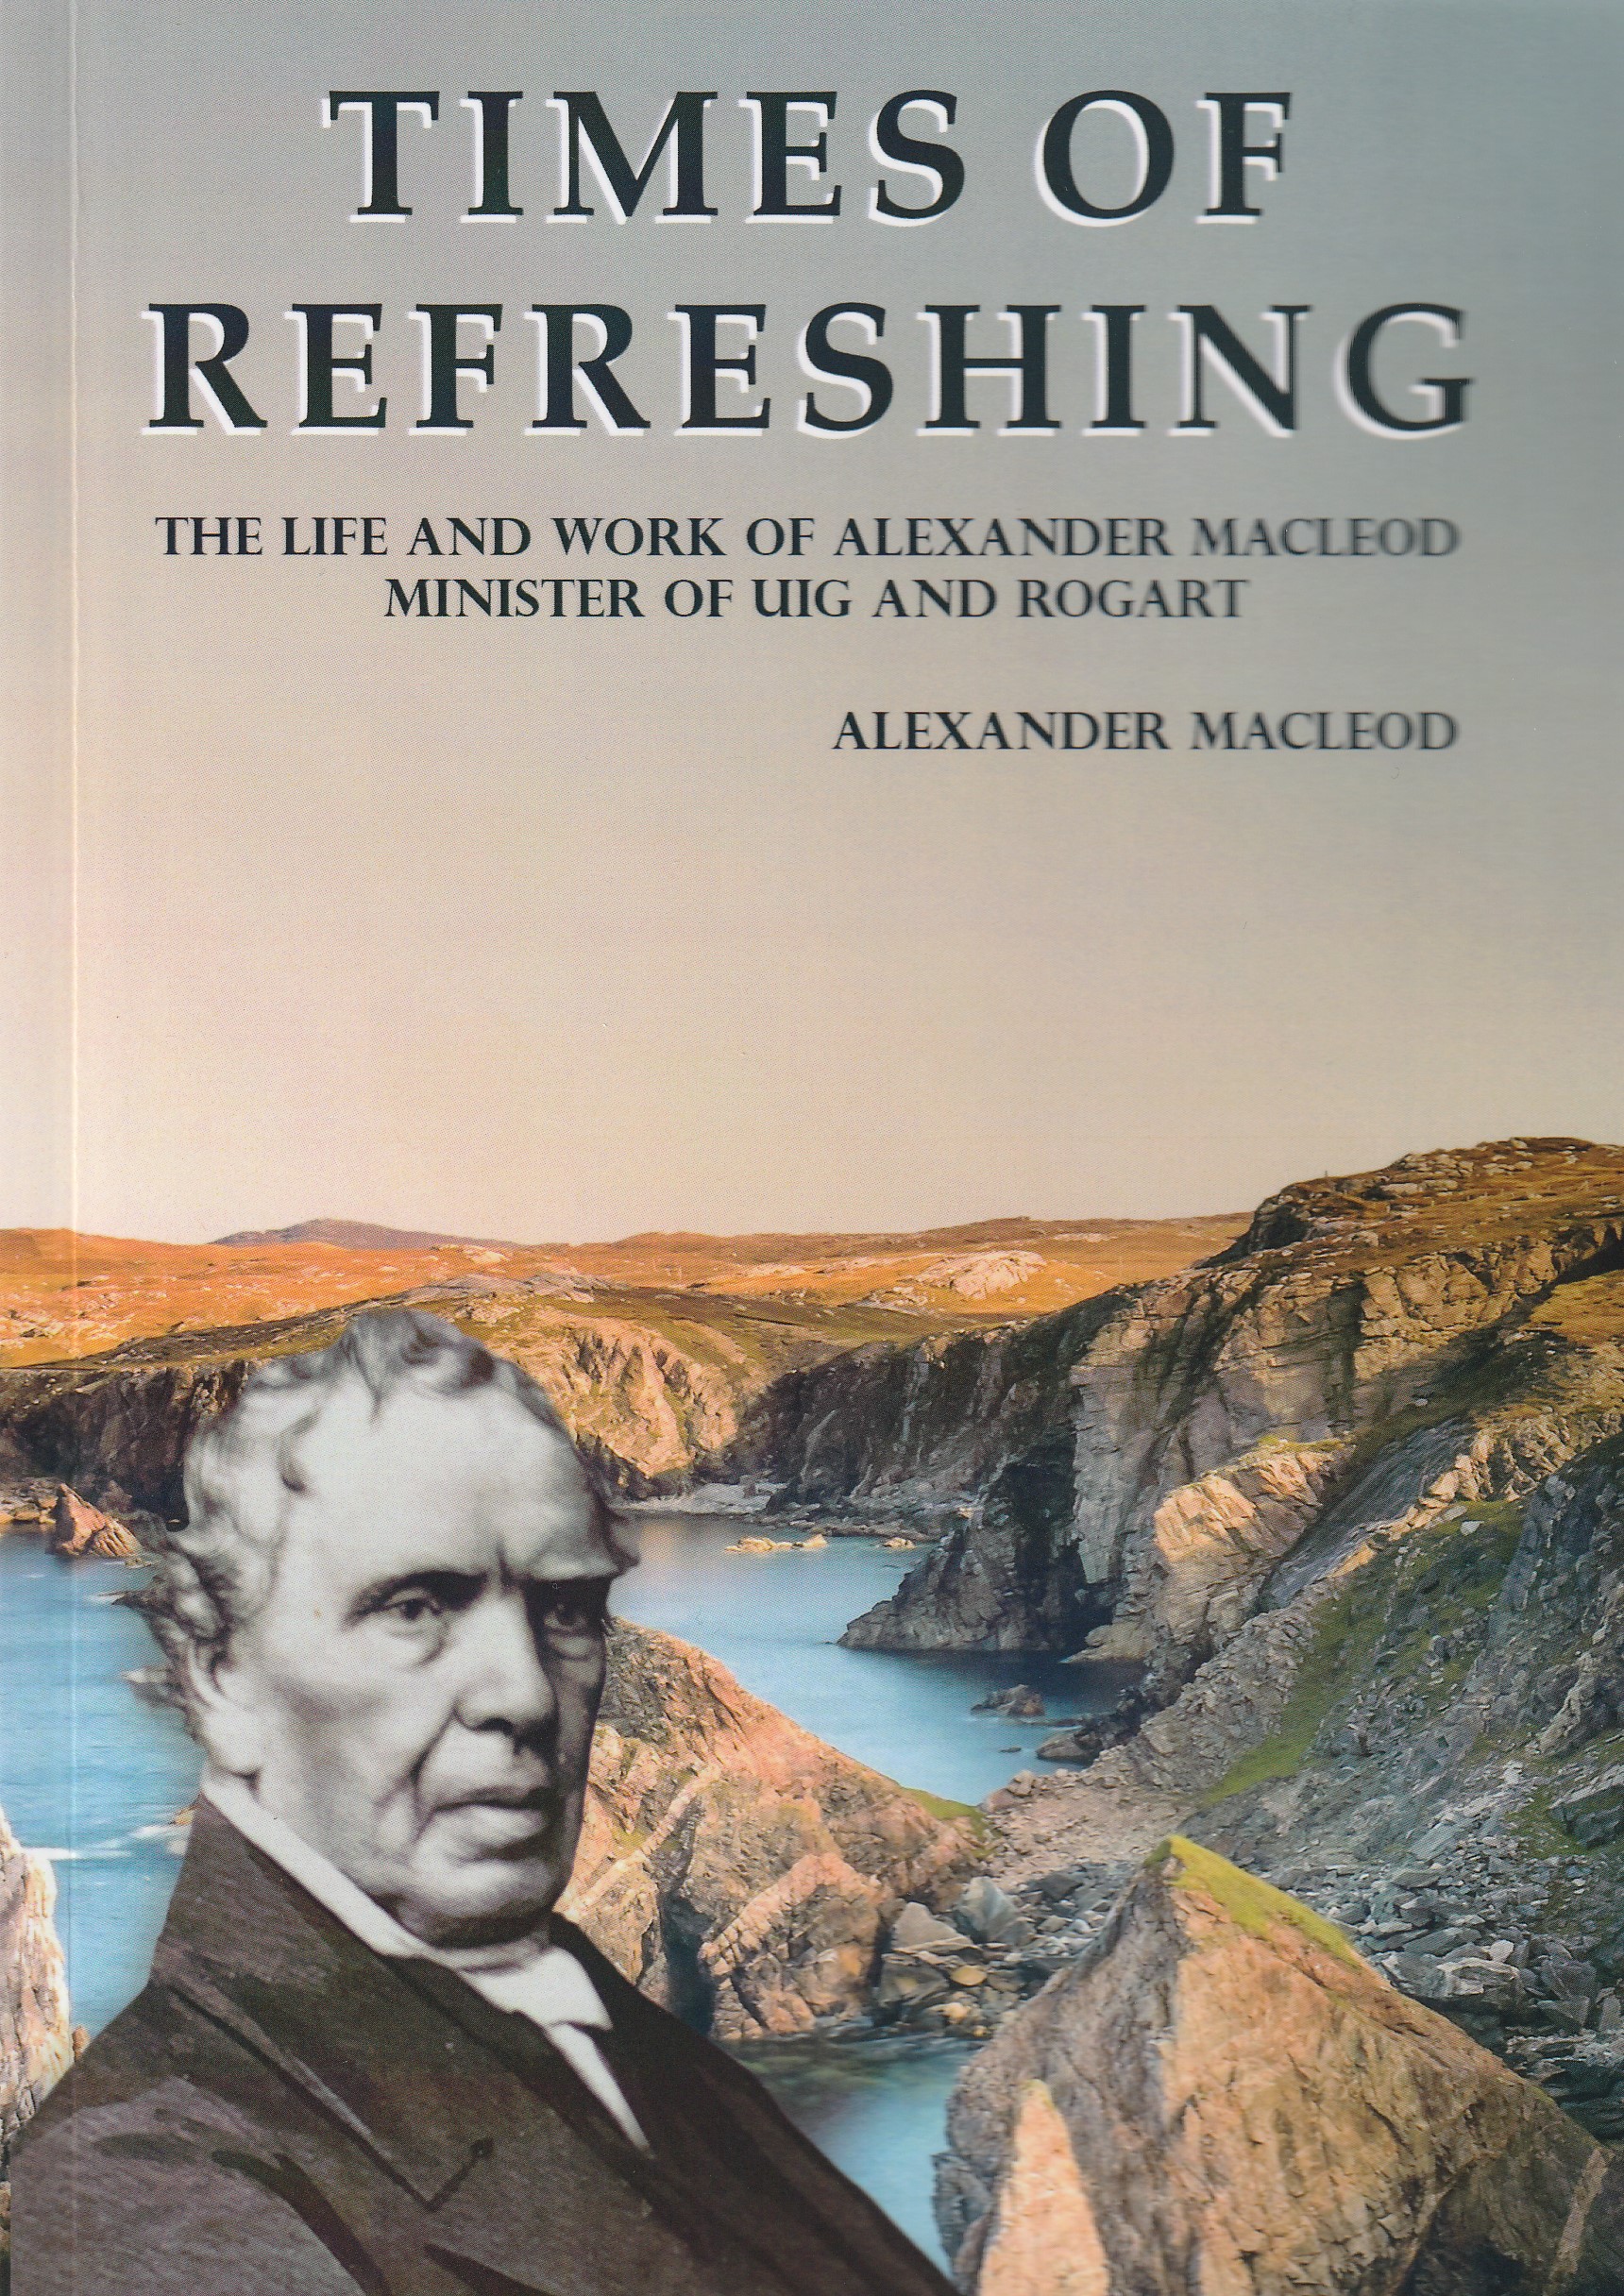 Times of Refreshing: The Life and Work of Alexander Macleod